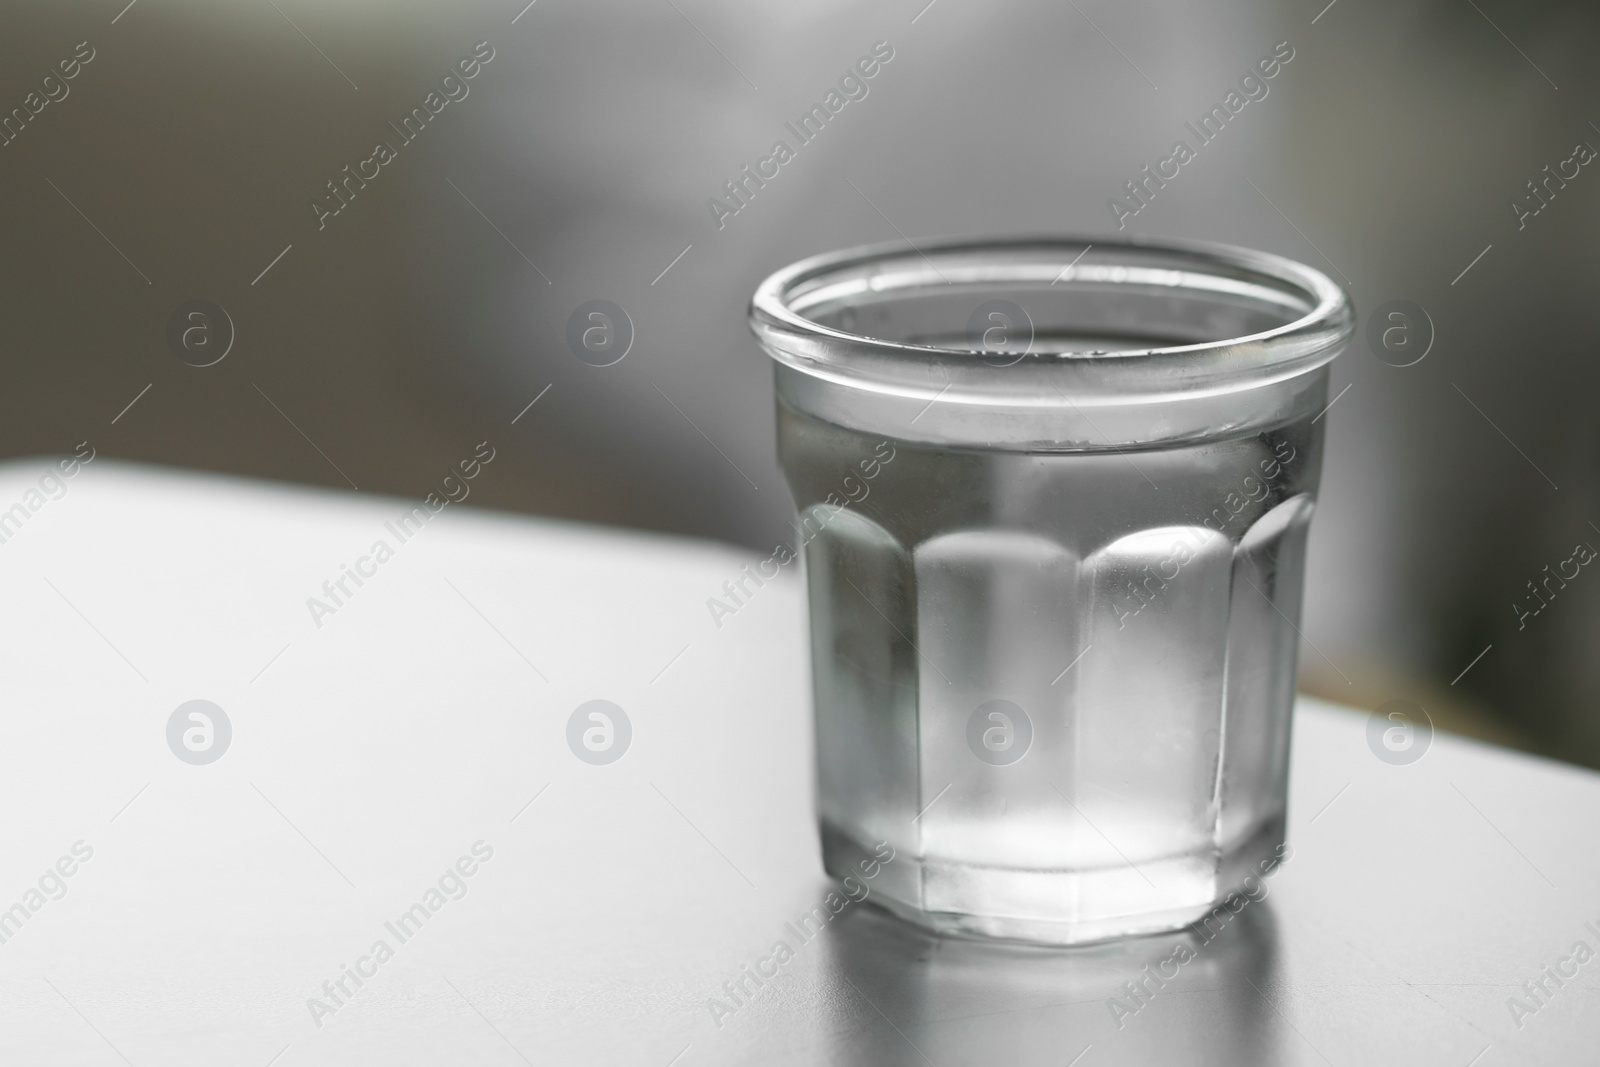 Photo of Glass of pure water on light table against blurred background, space for text